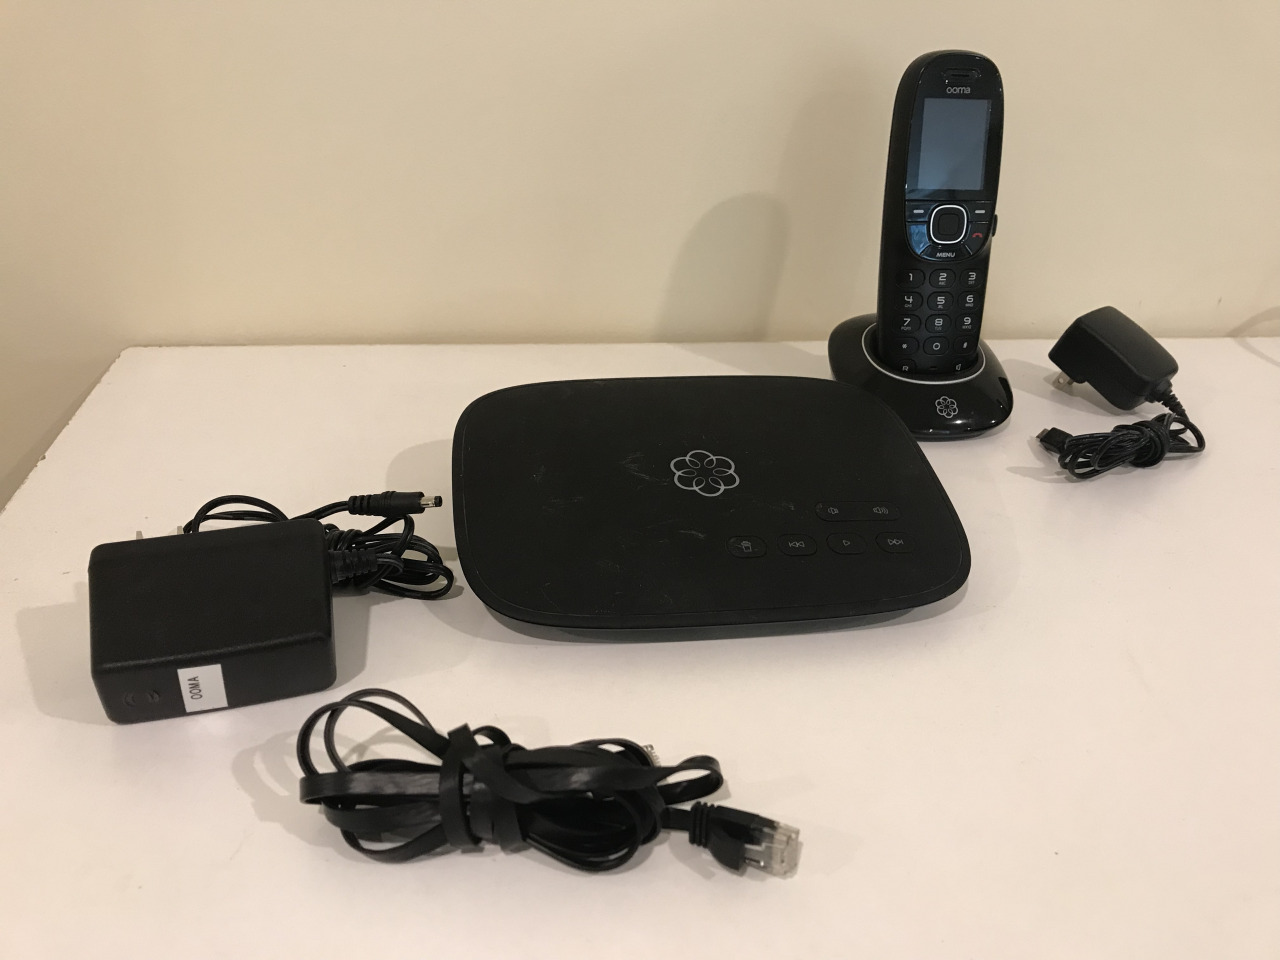 Ooma Telo base and HD2 handset for VoIP Phone Service